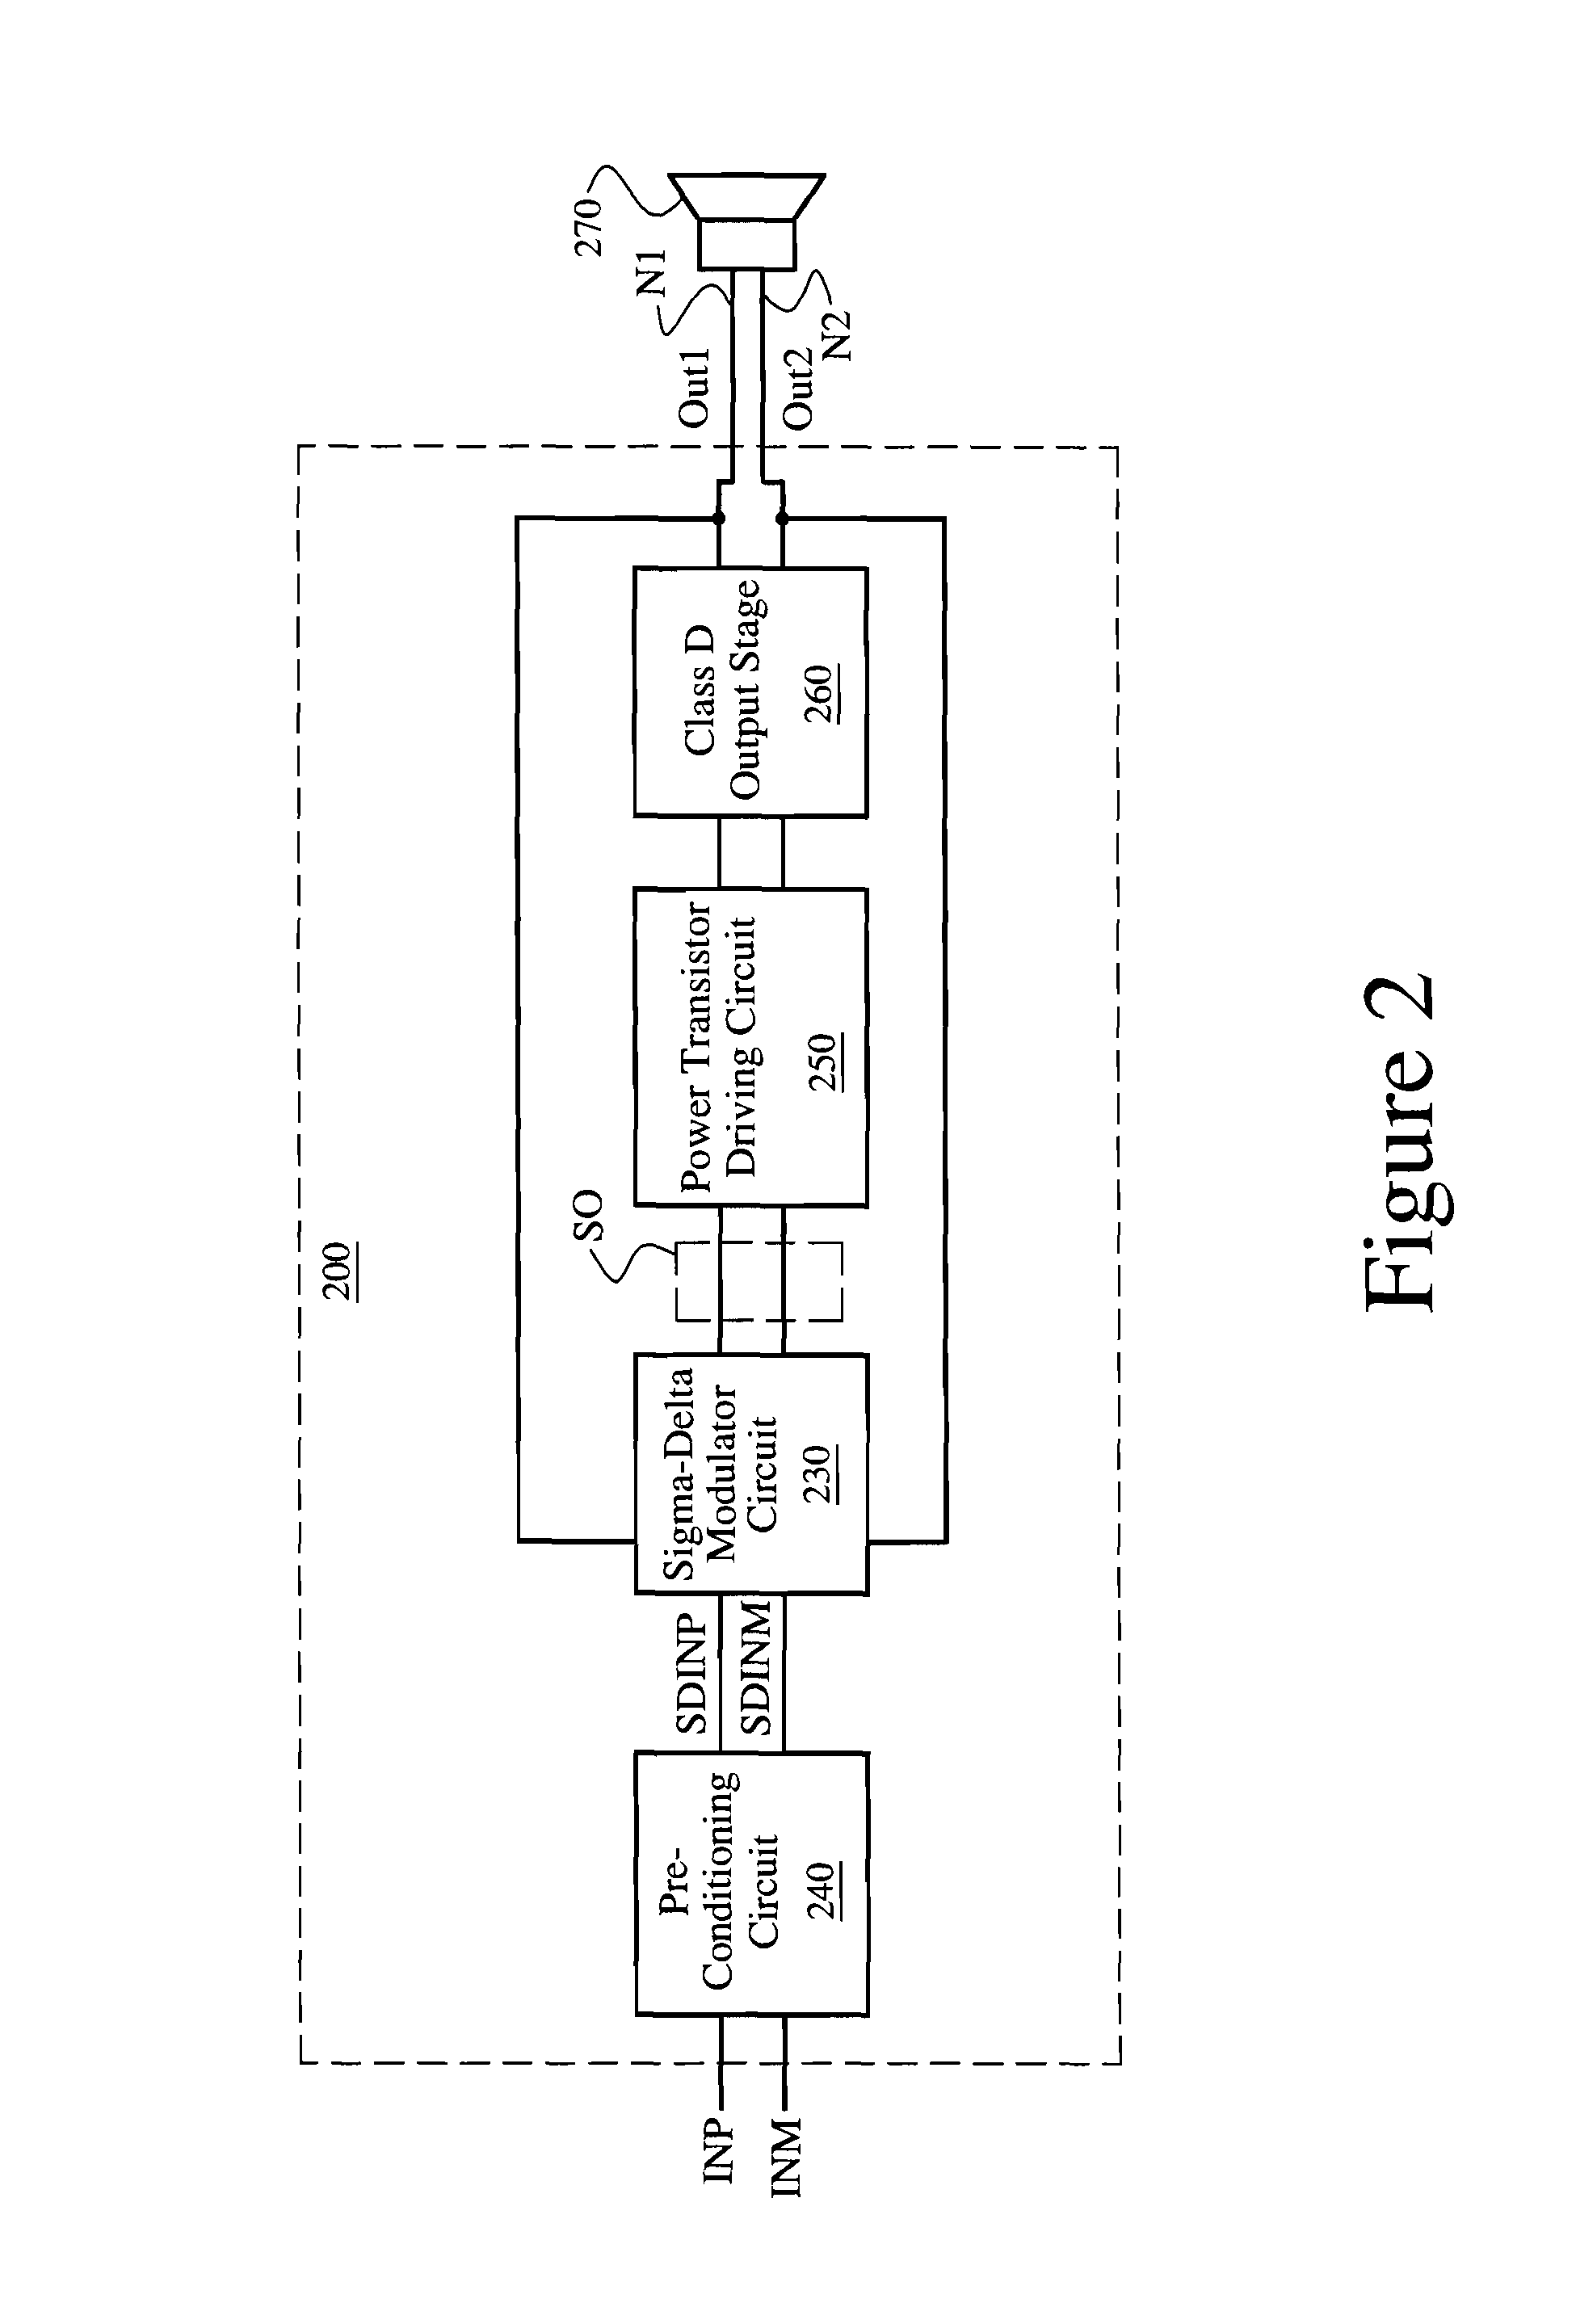 Apparatus and method for a class D audio power amplifier with a higher-order sigma-delta topology